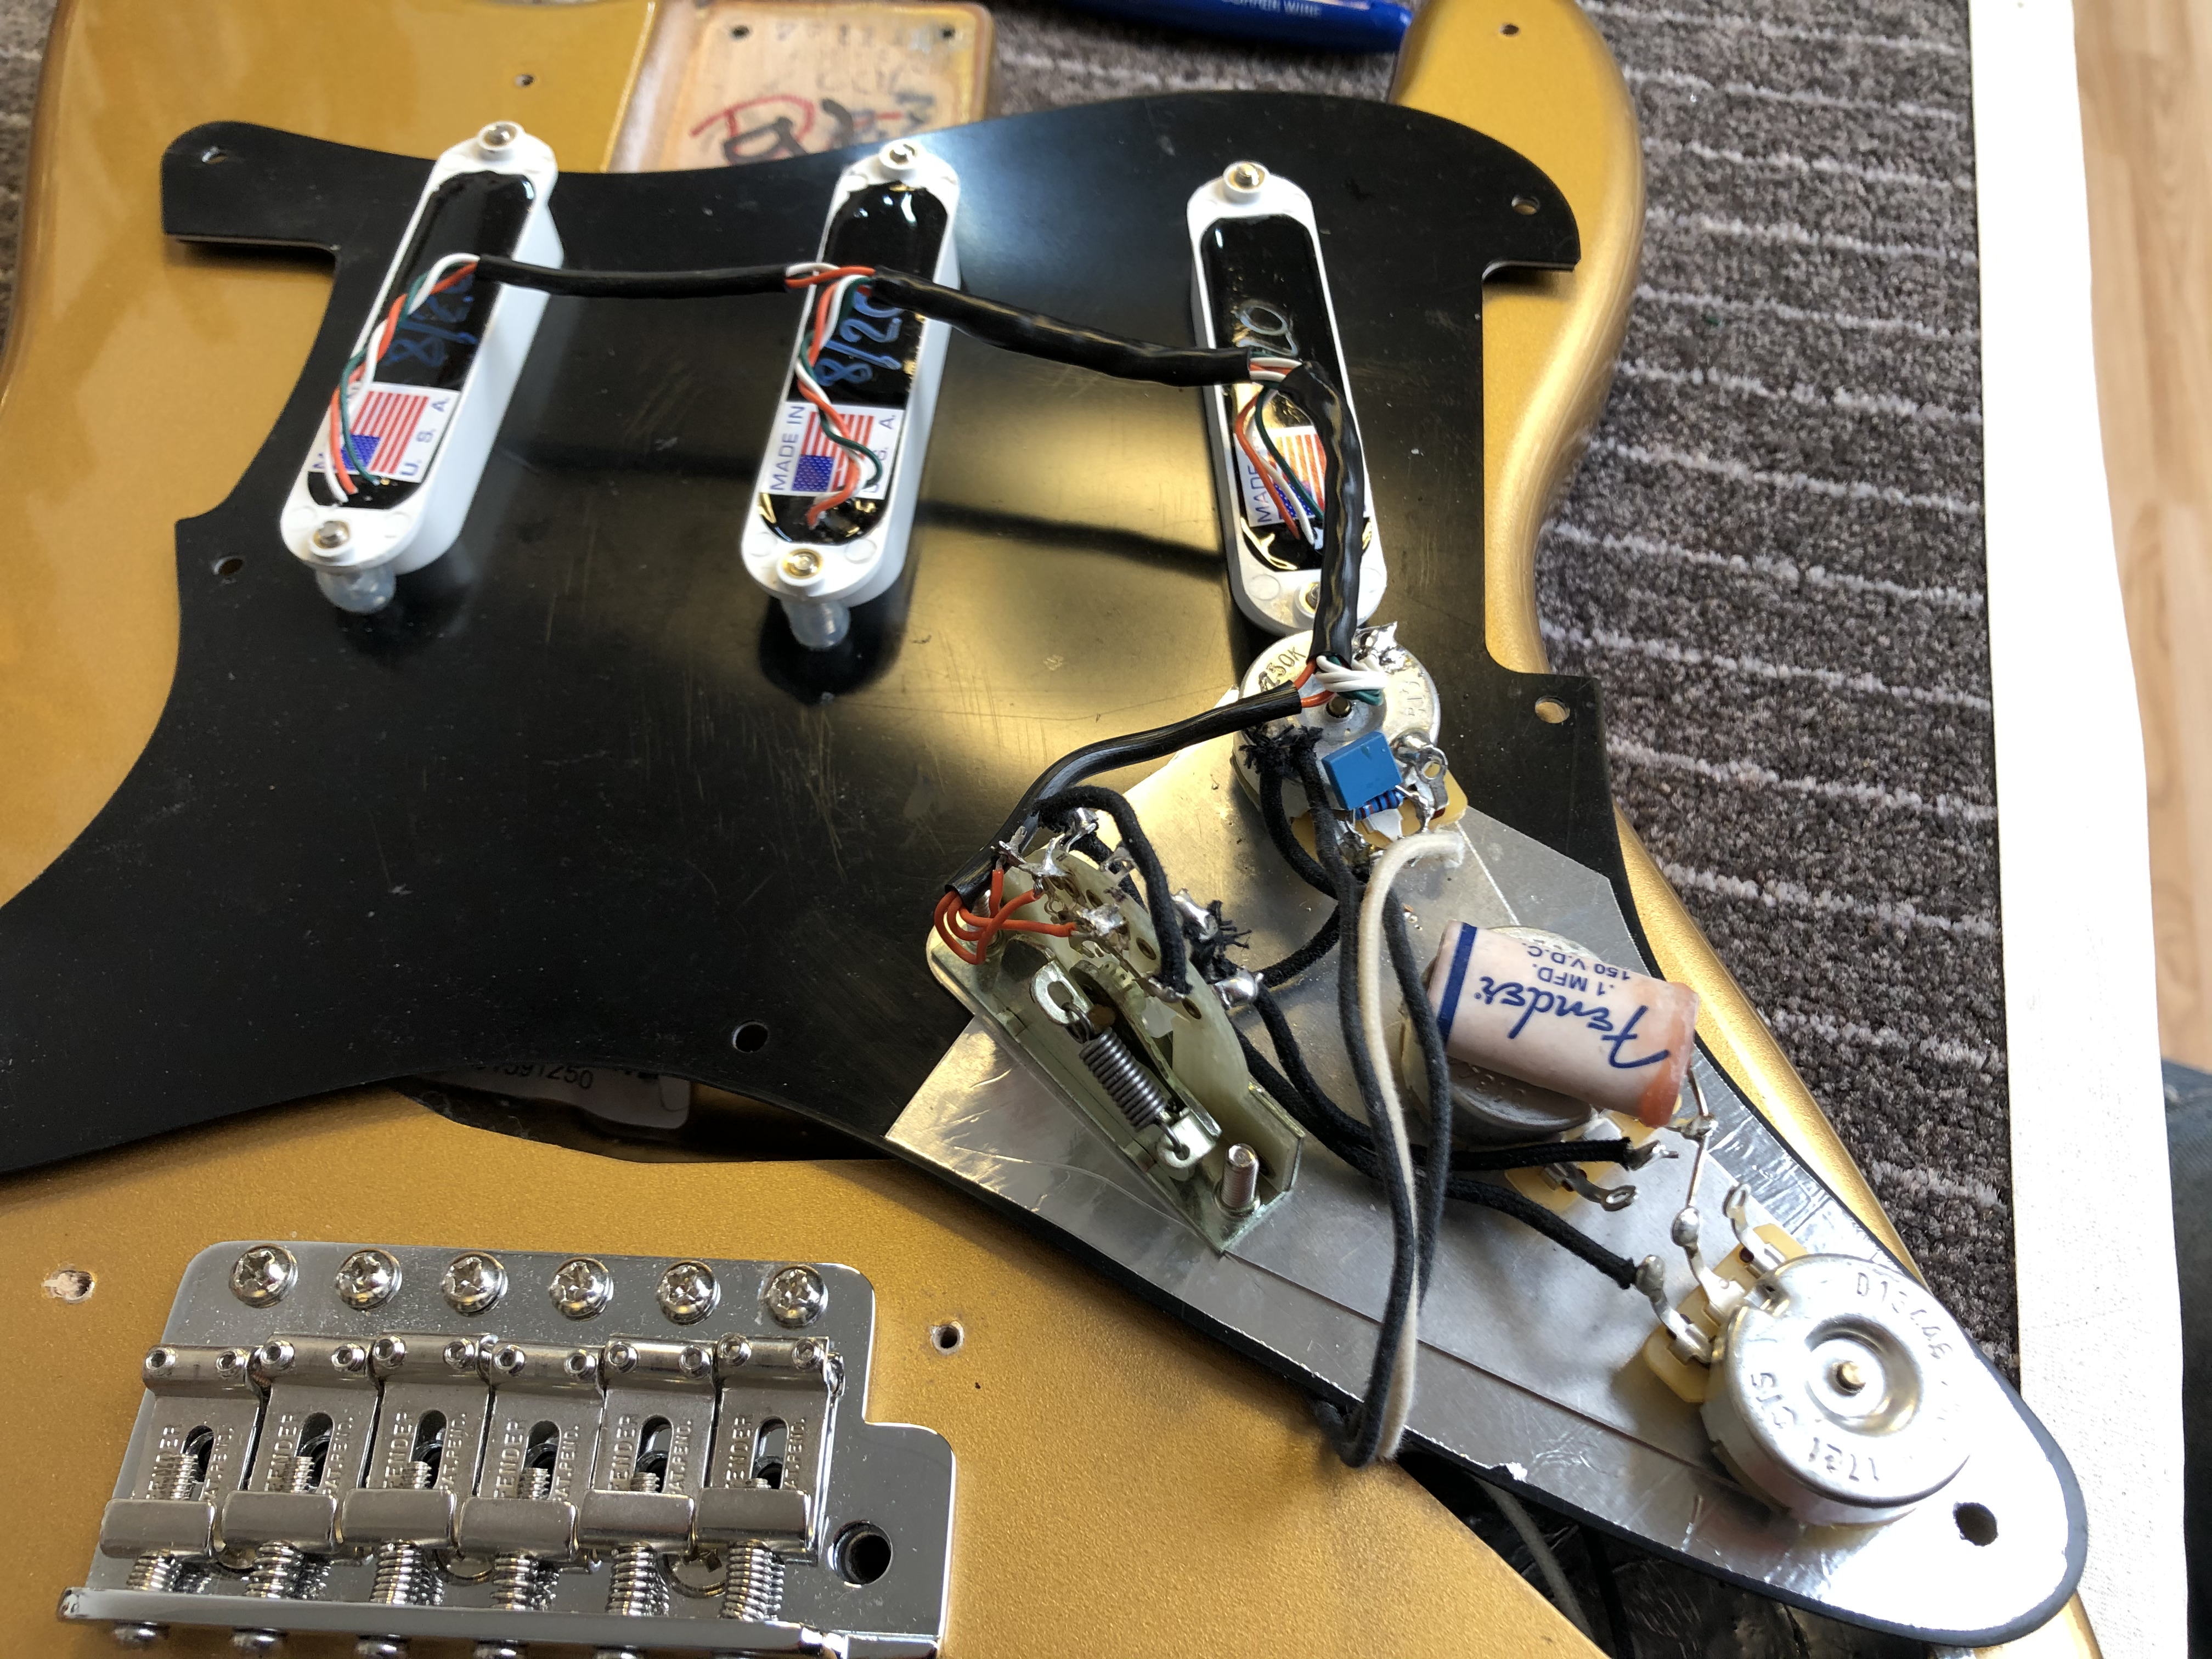 Strat with Wiring Issues